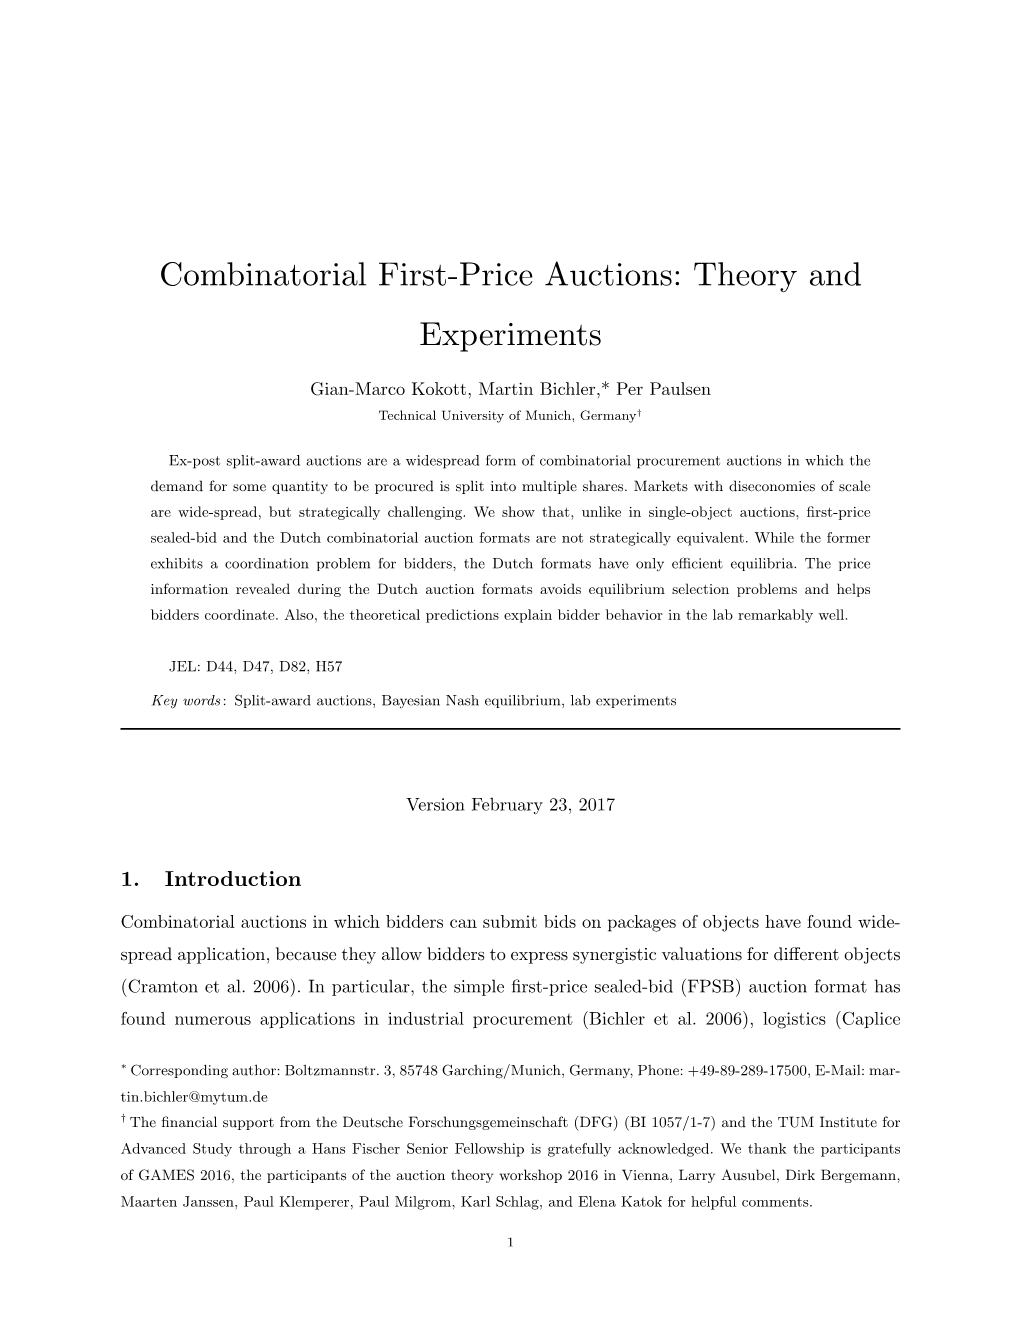 Combinatorial First-Price Auctions: Theory and Experiments